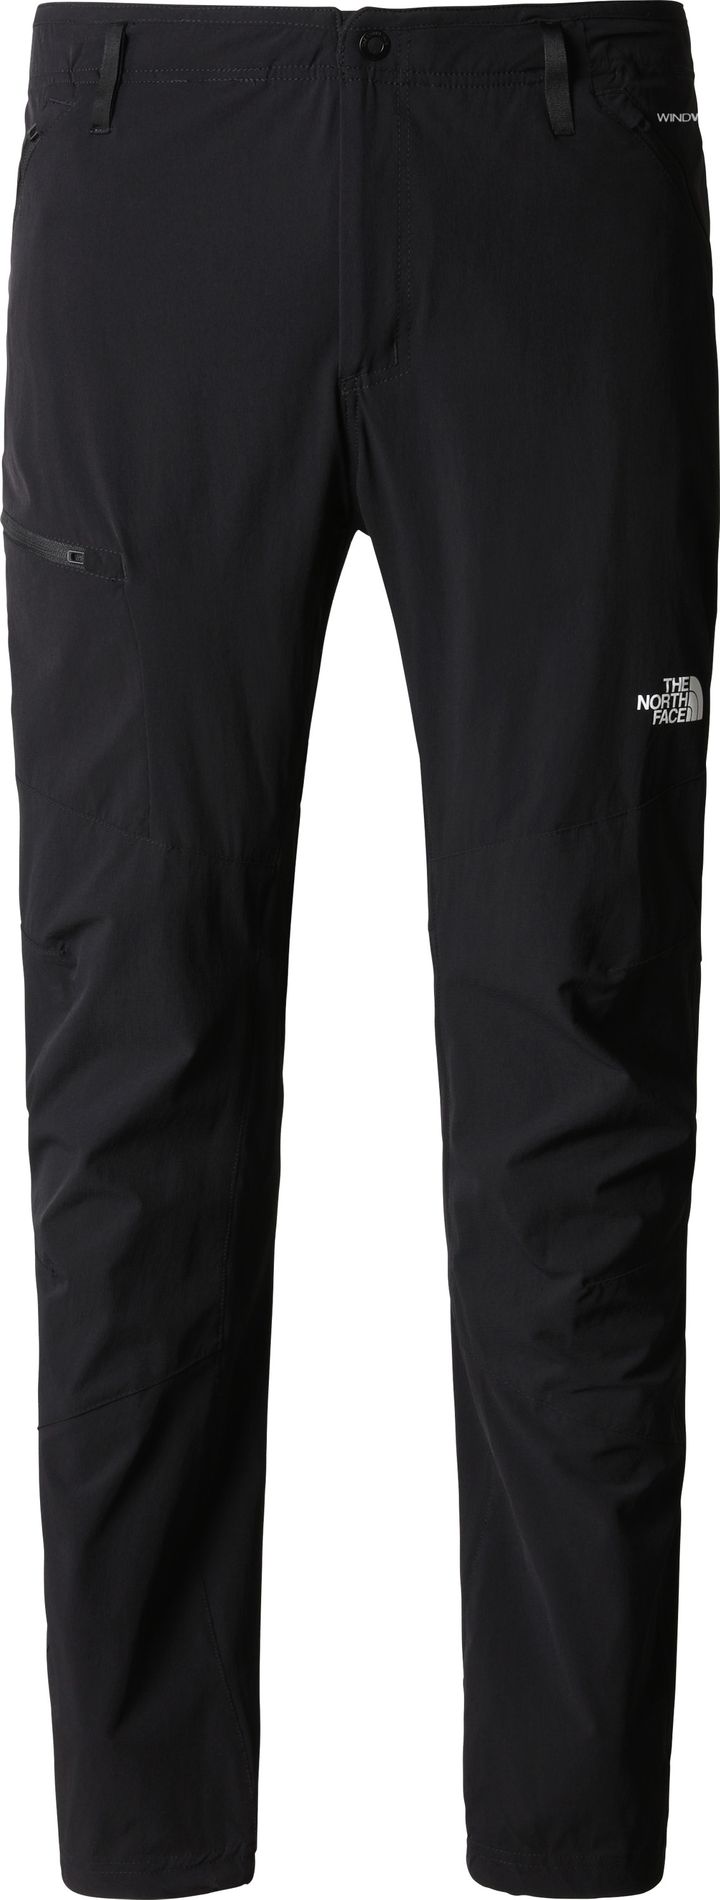 The North Face M Speedl S Tpr Pant TNF BLACK The North Face